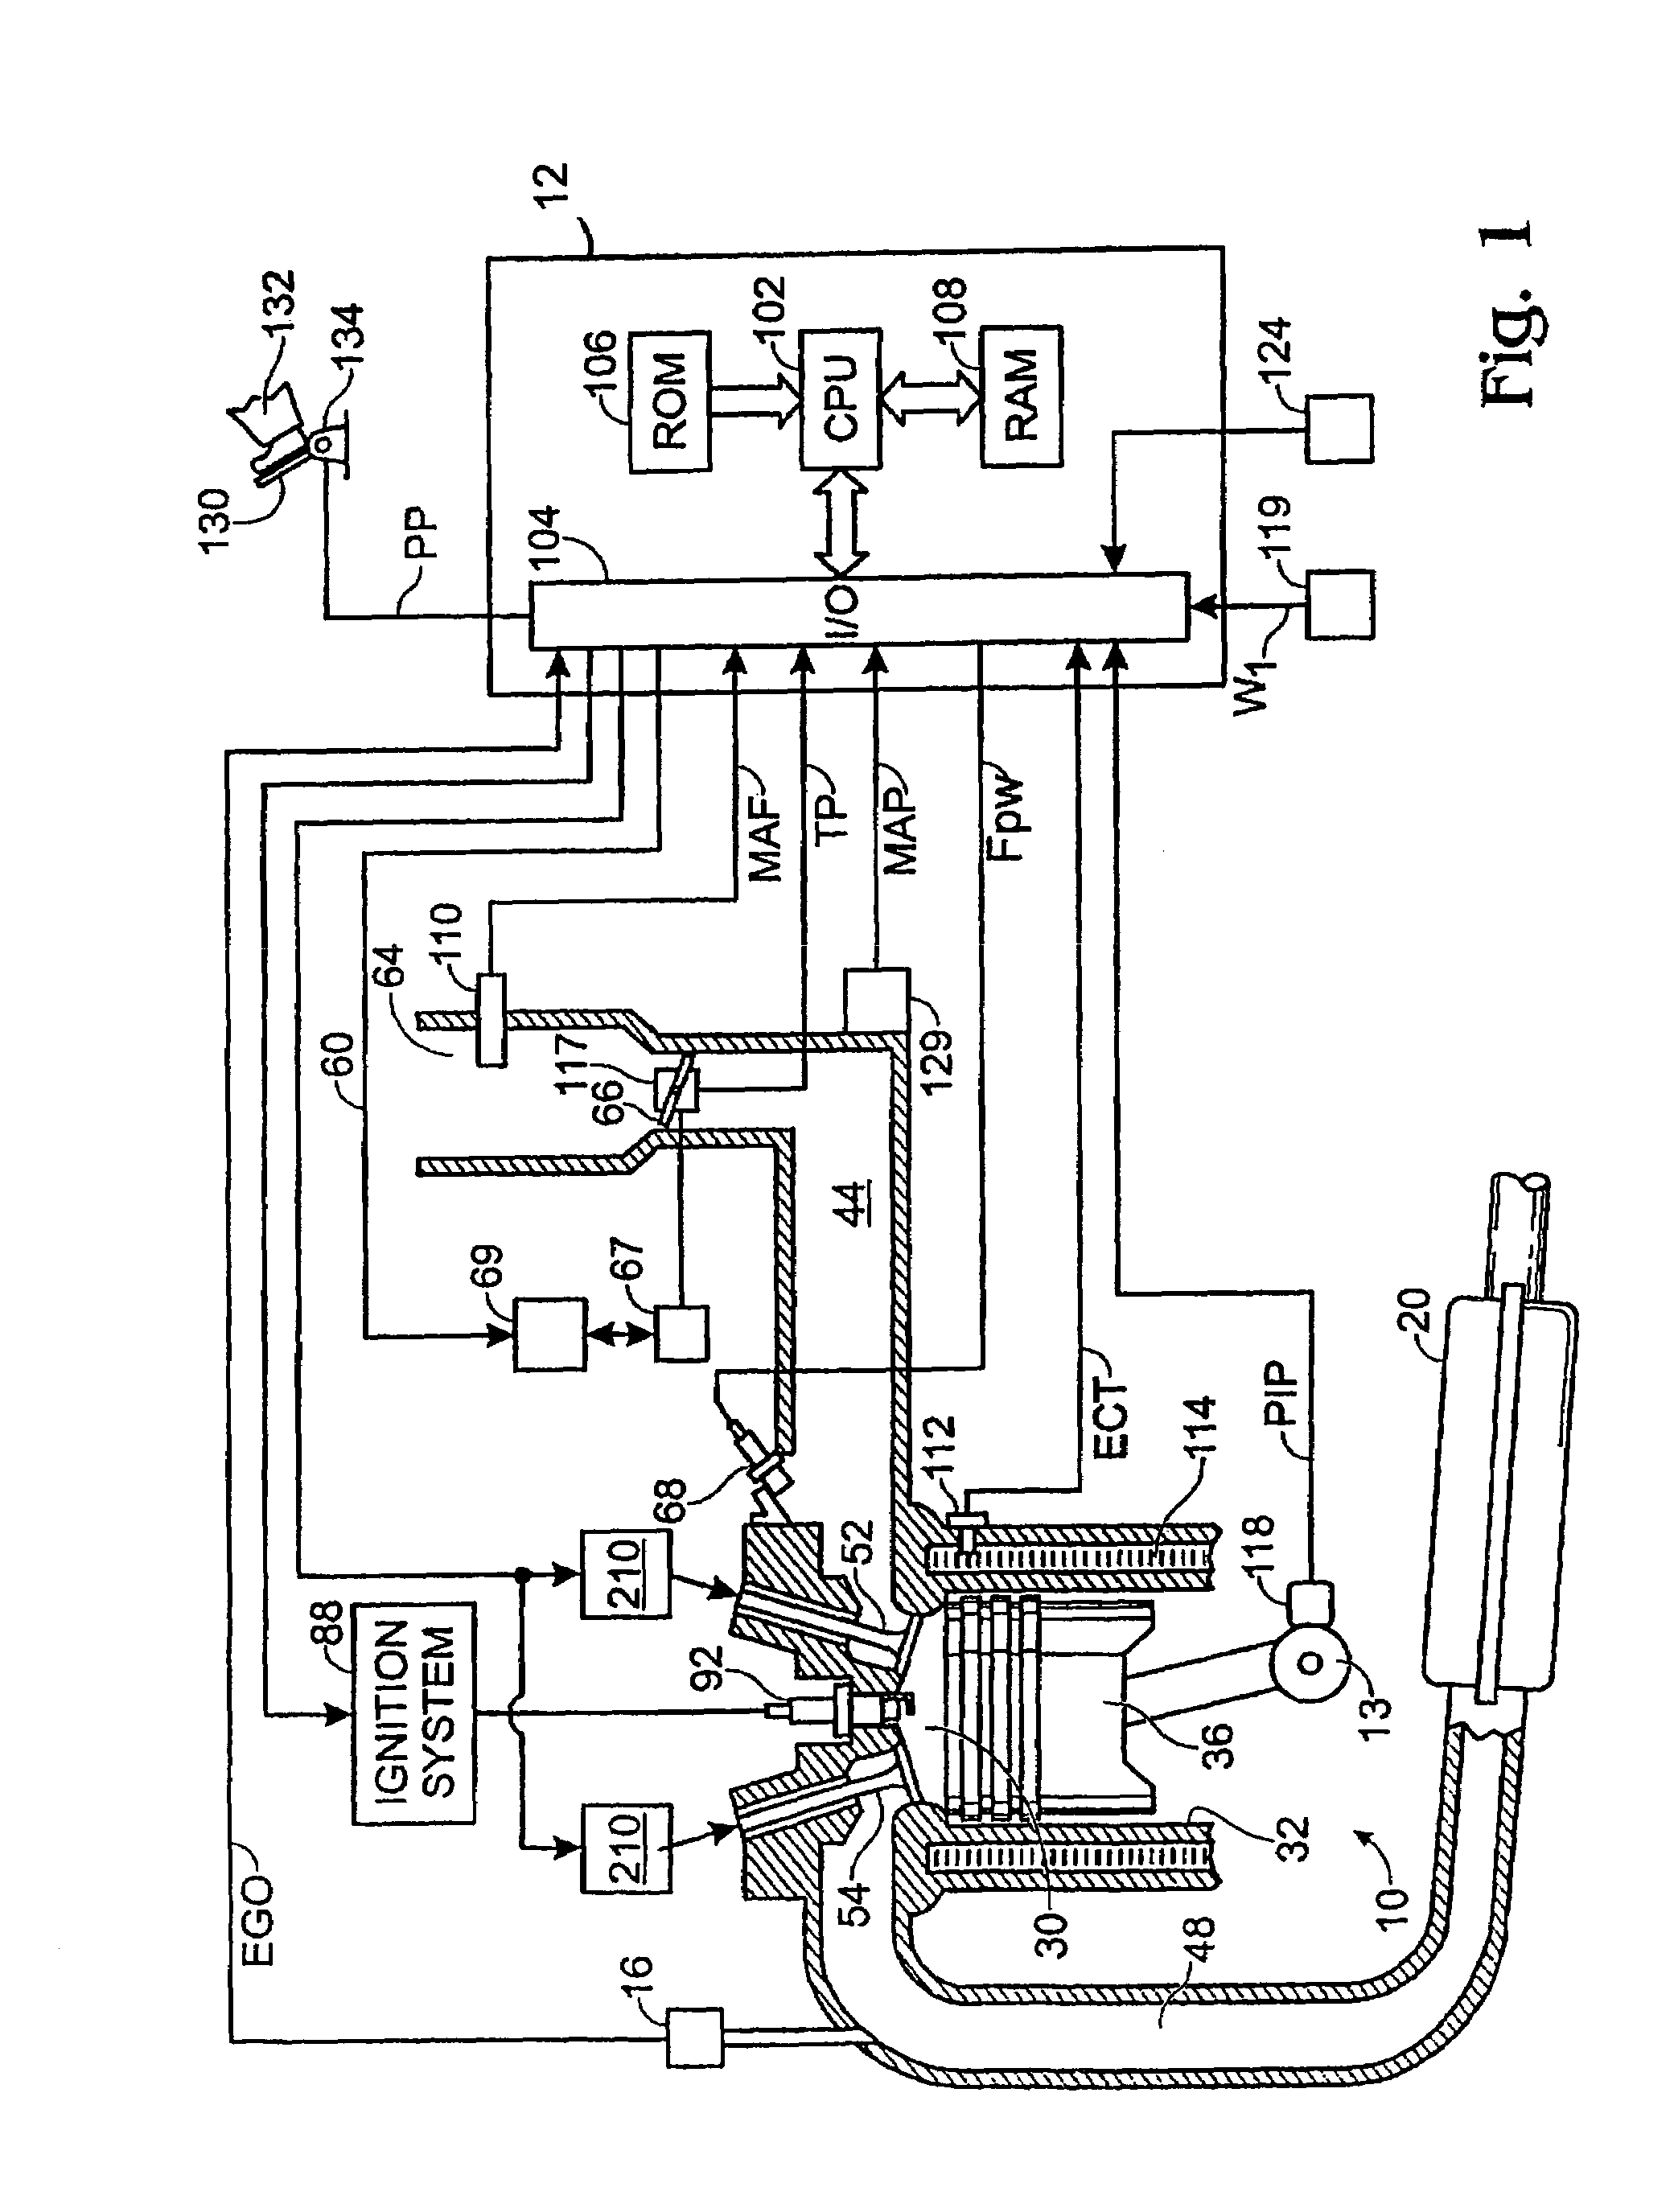 Permanent magnet electromagnetic actuator for an electronic valve actuation system of an engine